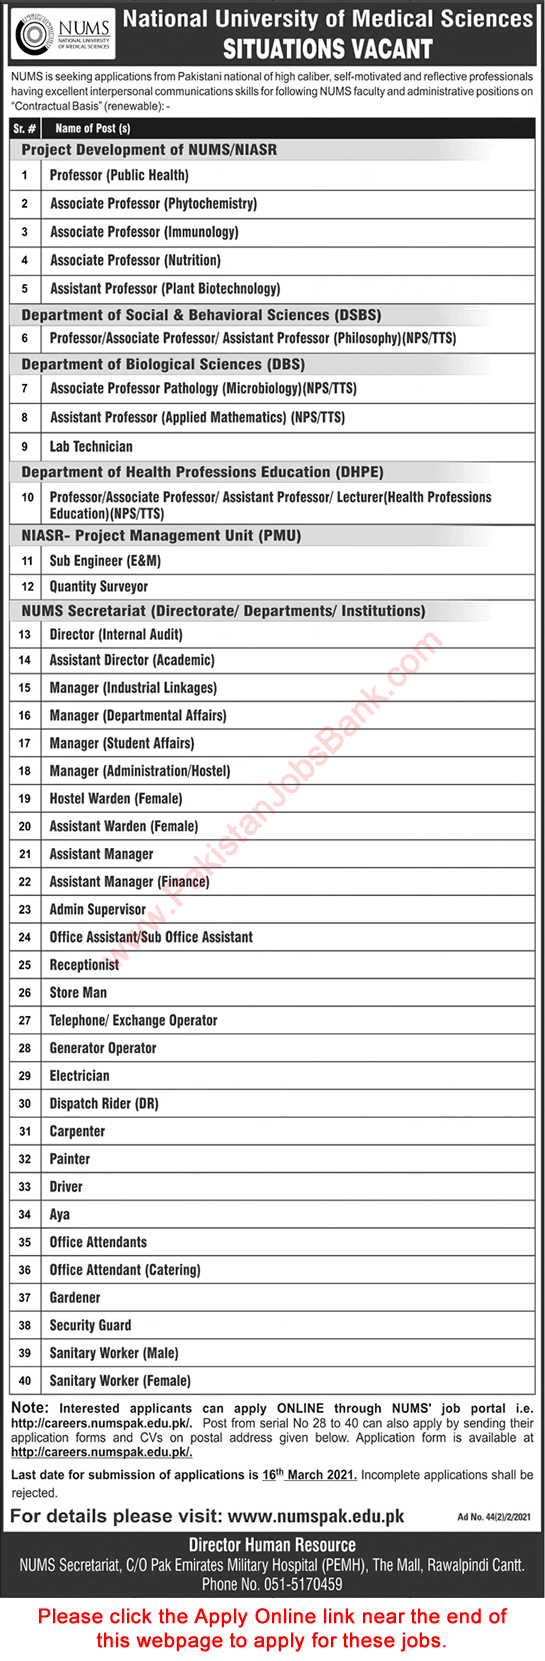 NUMS University Rawalpindi Jobs 2021 February / March Apply Online Teaching Faculty & Others Latest